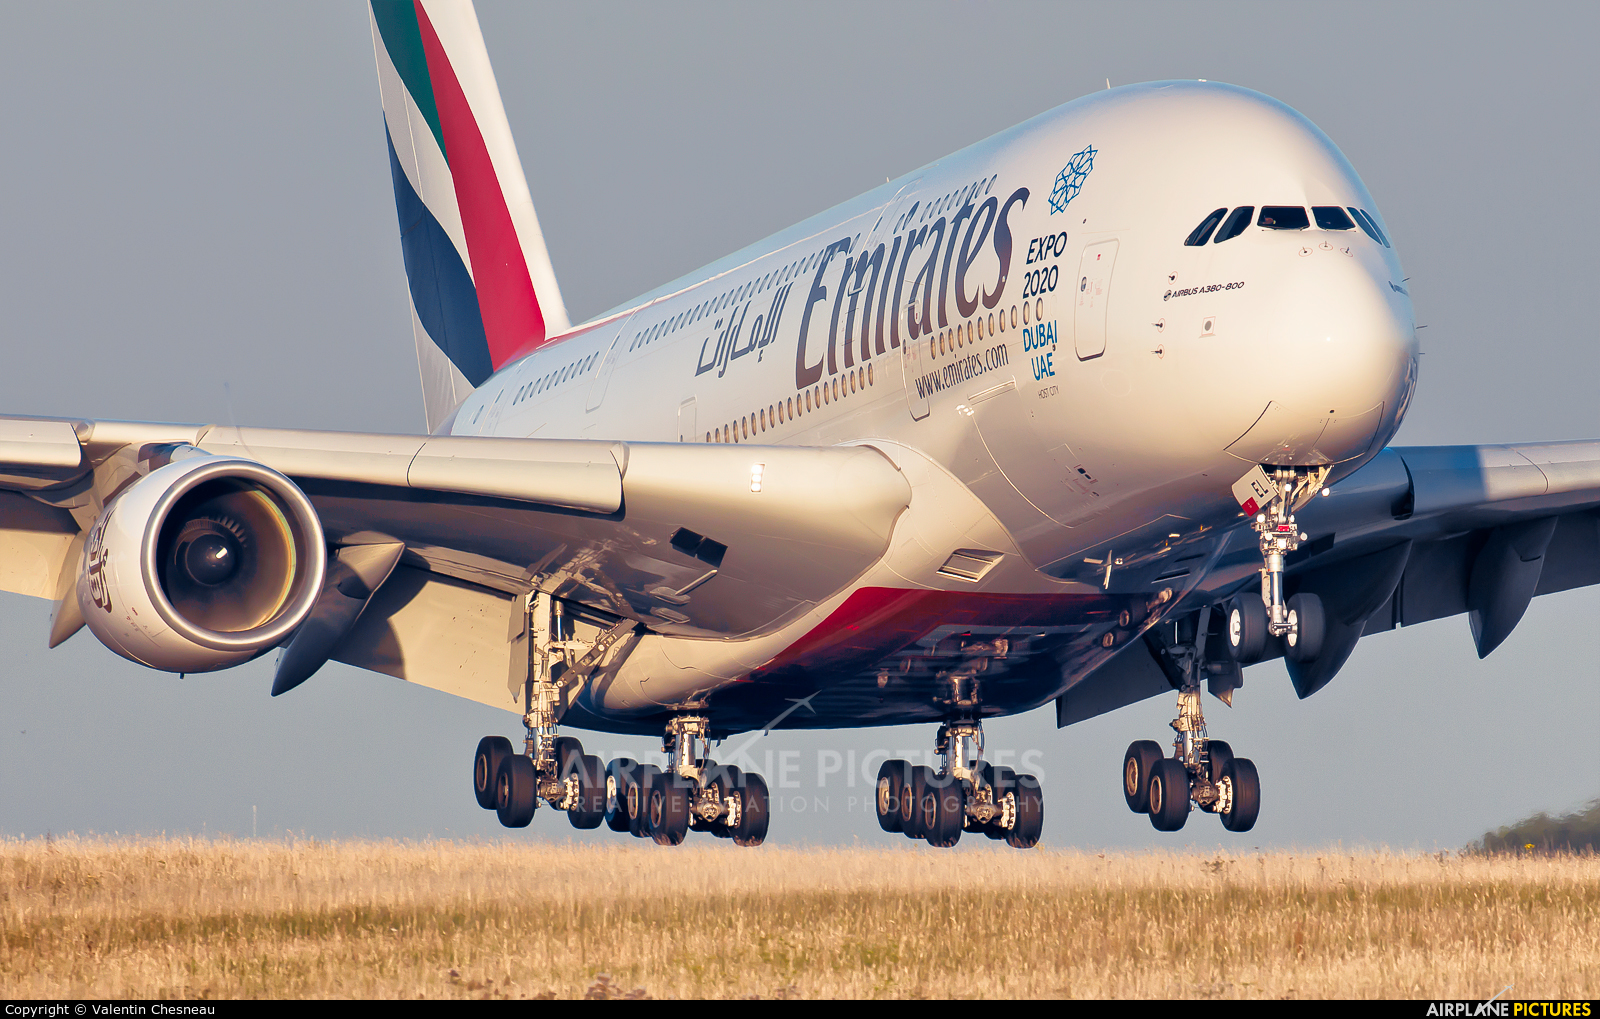 Emirates Airlines A6-EEL aircraft at Paris - Charles de Gaulle